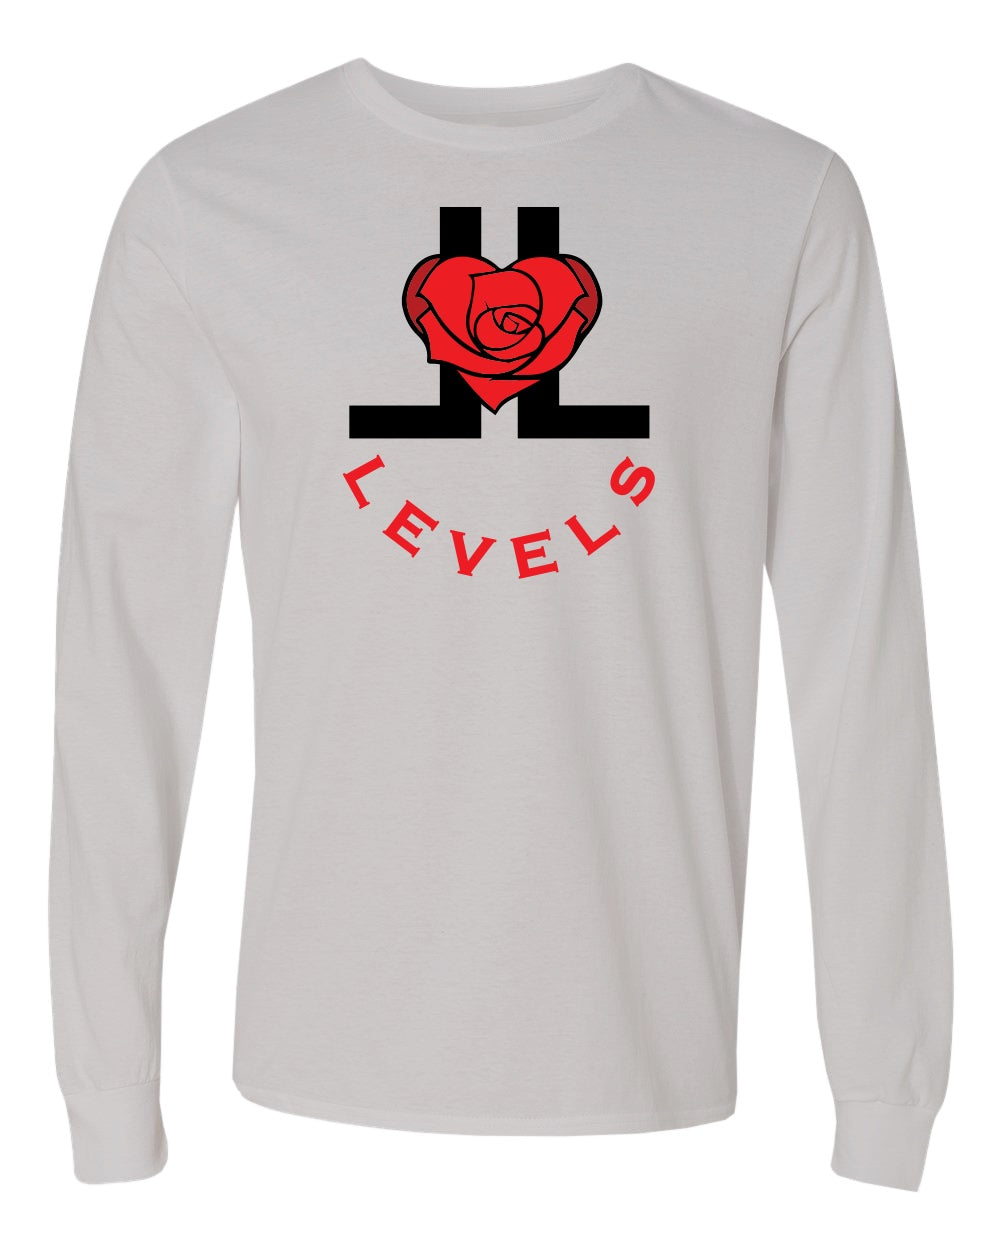 LEVELS UNFORGETTABLE (LONG SLEEVE) SHIRT